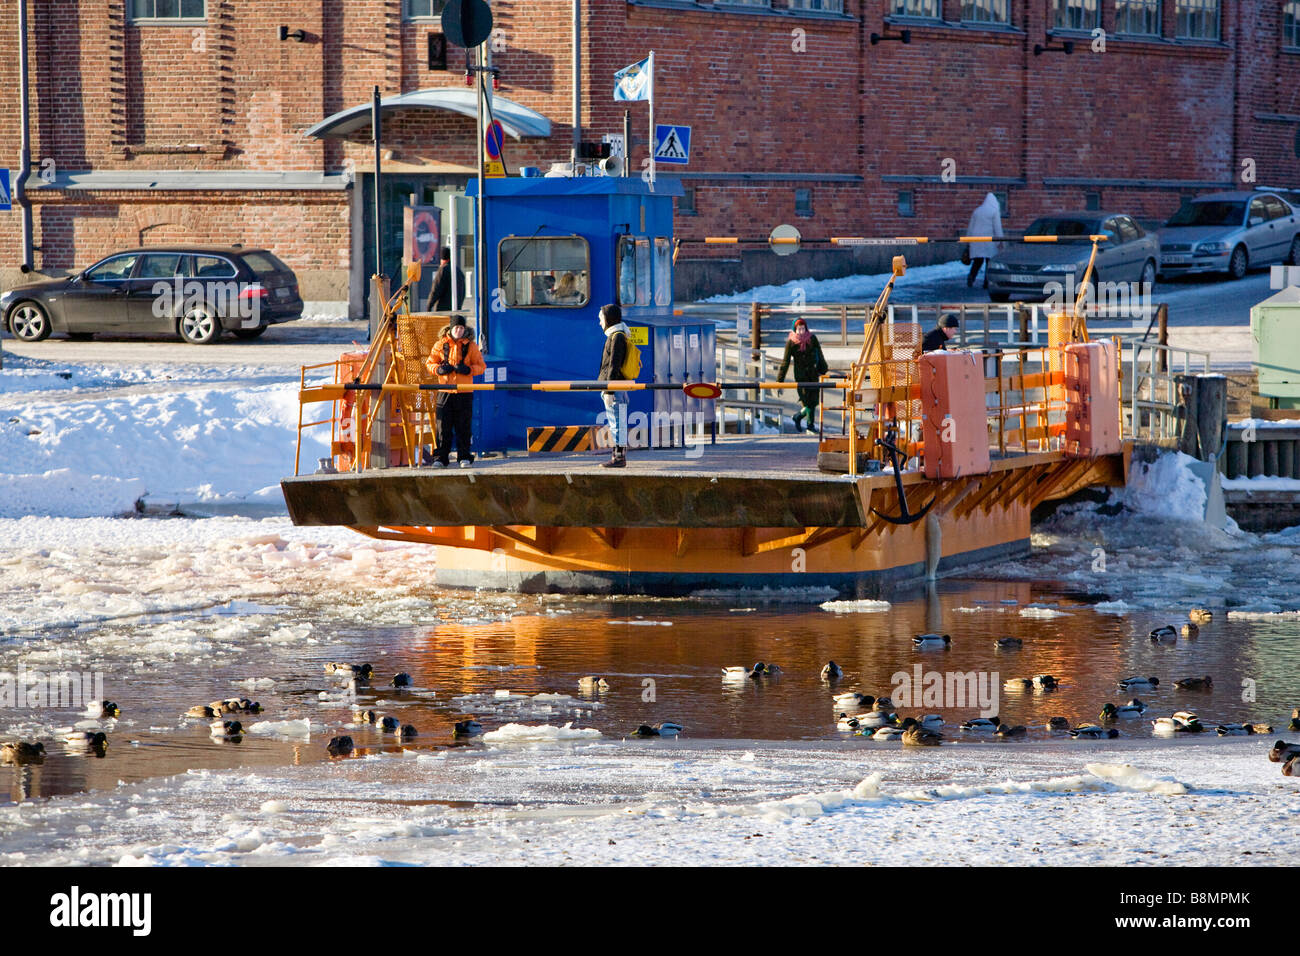 Ferry crossing Aura River in Turku Finland For editorial use only. Stock Photo